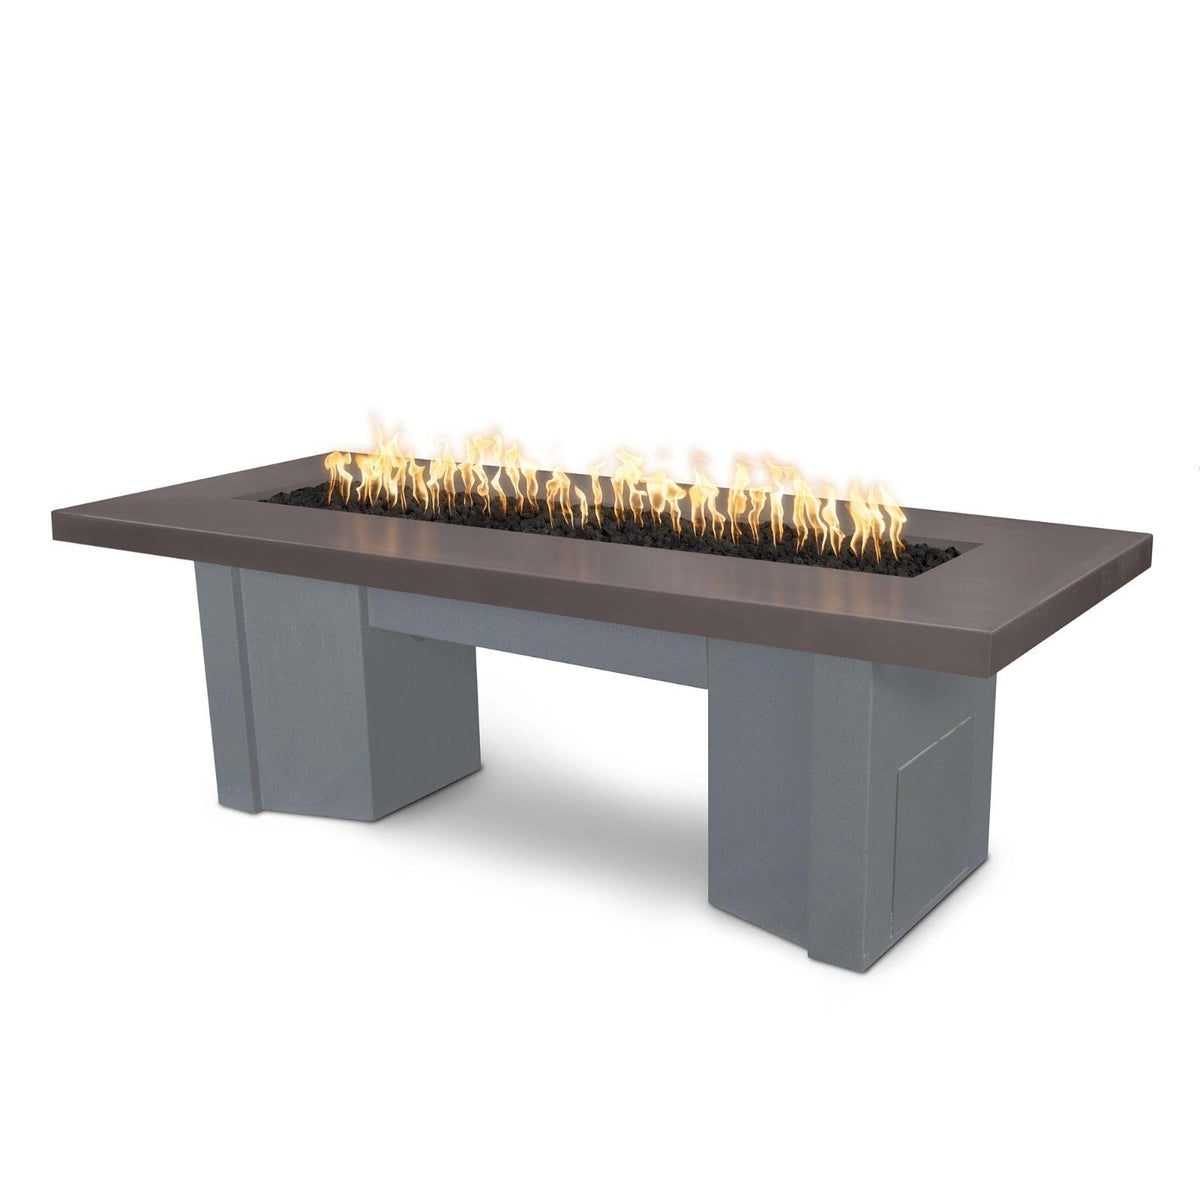 The Outdoor Plus Fire Features Chestnut (-CST) / Gray Powder Coated Steel (-GRY) The Outdoor Plus 78&quot; Alameda Fire Table Smooth Concrete in Liquid Propane - 110V Plug &amp; Play Electronic Ignition / OPT-ALMGFRC78EKIT-LP